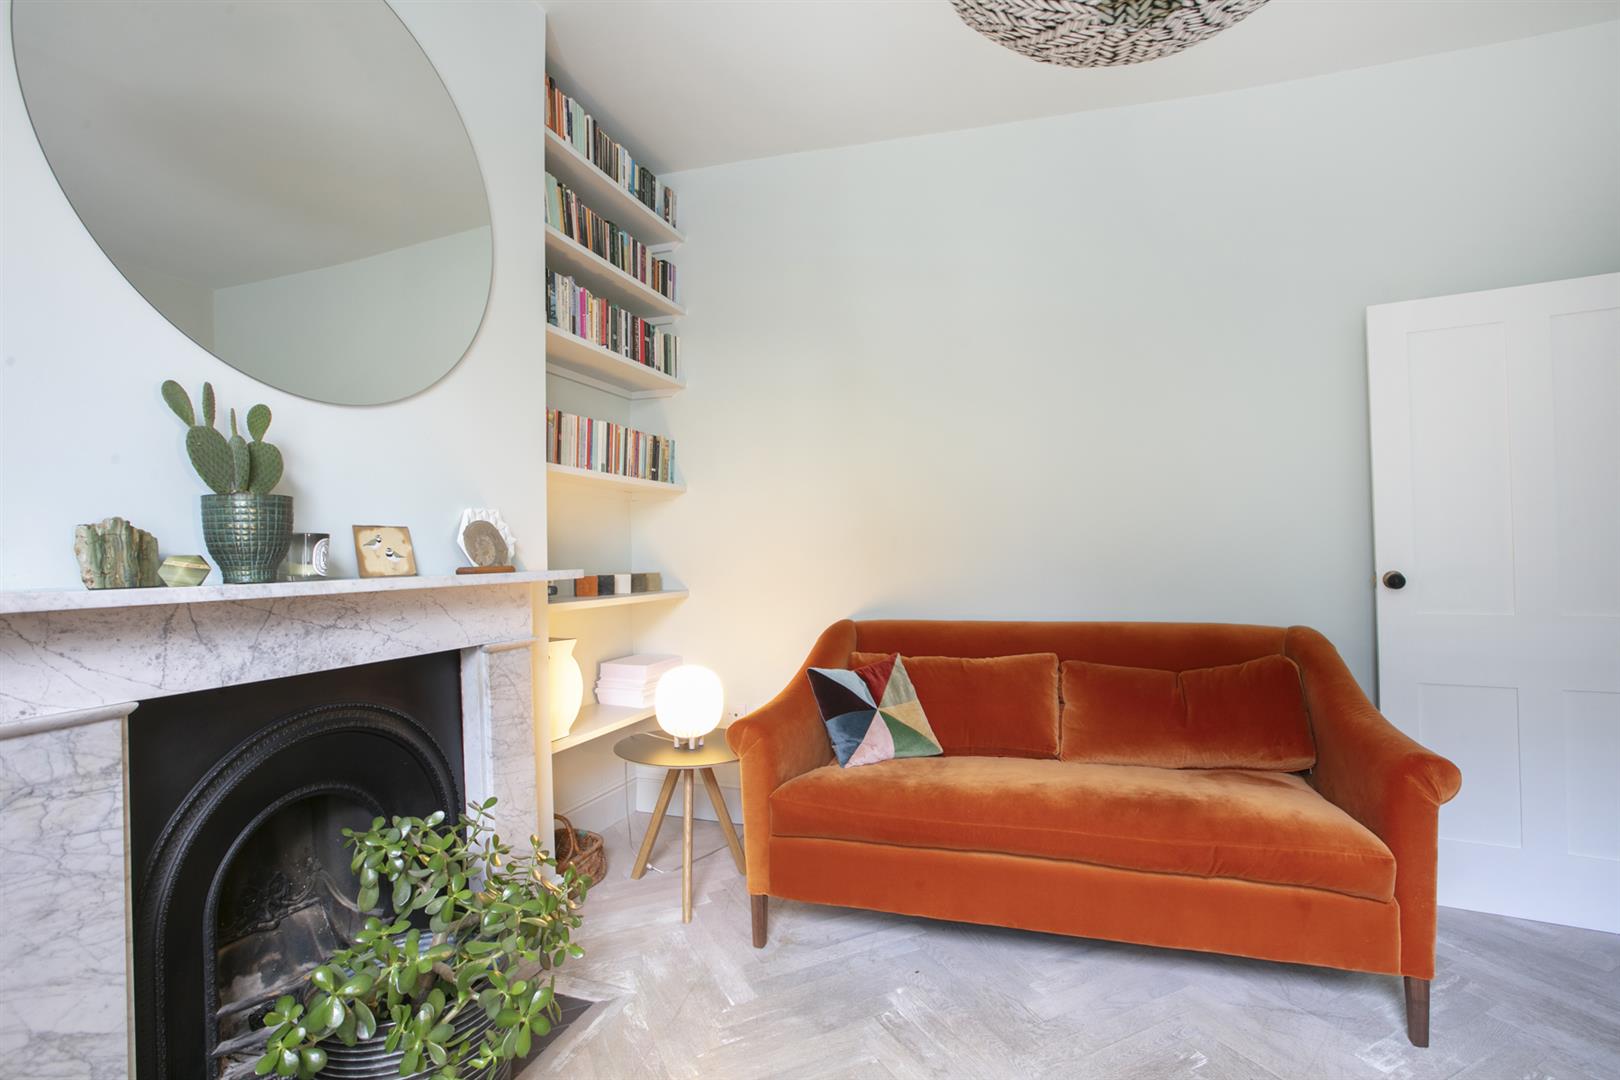 Flat - Conversion For Sale in Talfourd Place, Peckham, SE15 873 view5